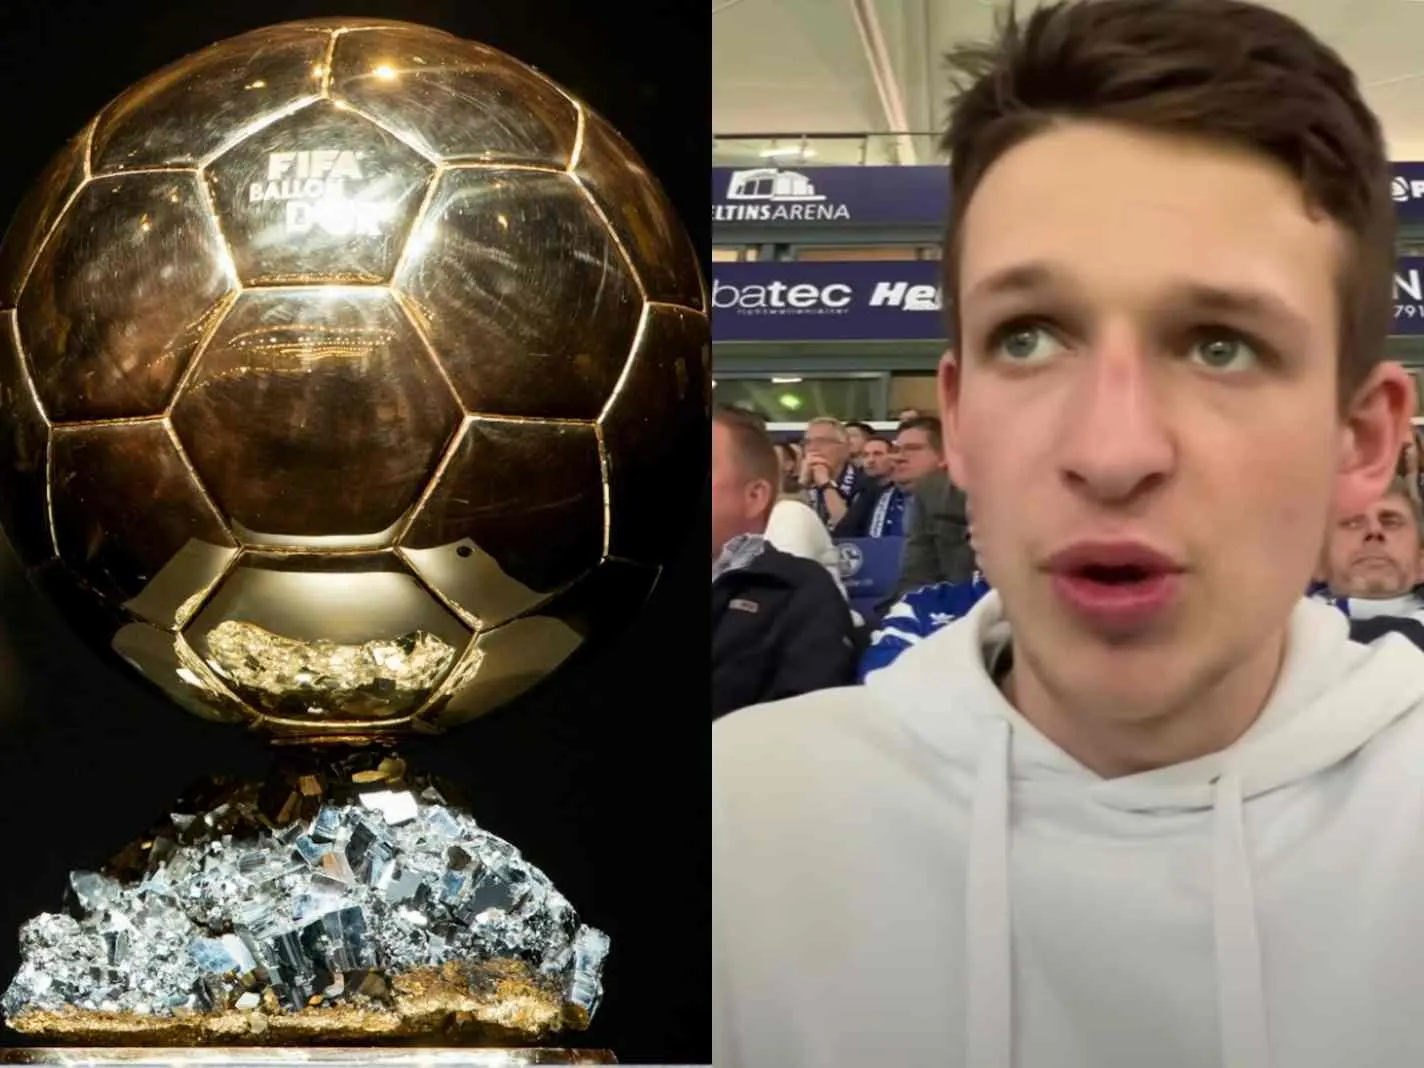 The photo shows the Ballon d'Or trophy along with a screenshot from Thogden's latest YouTube video.